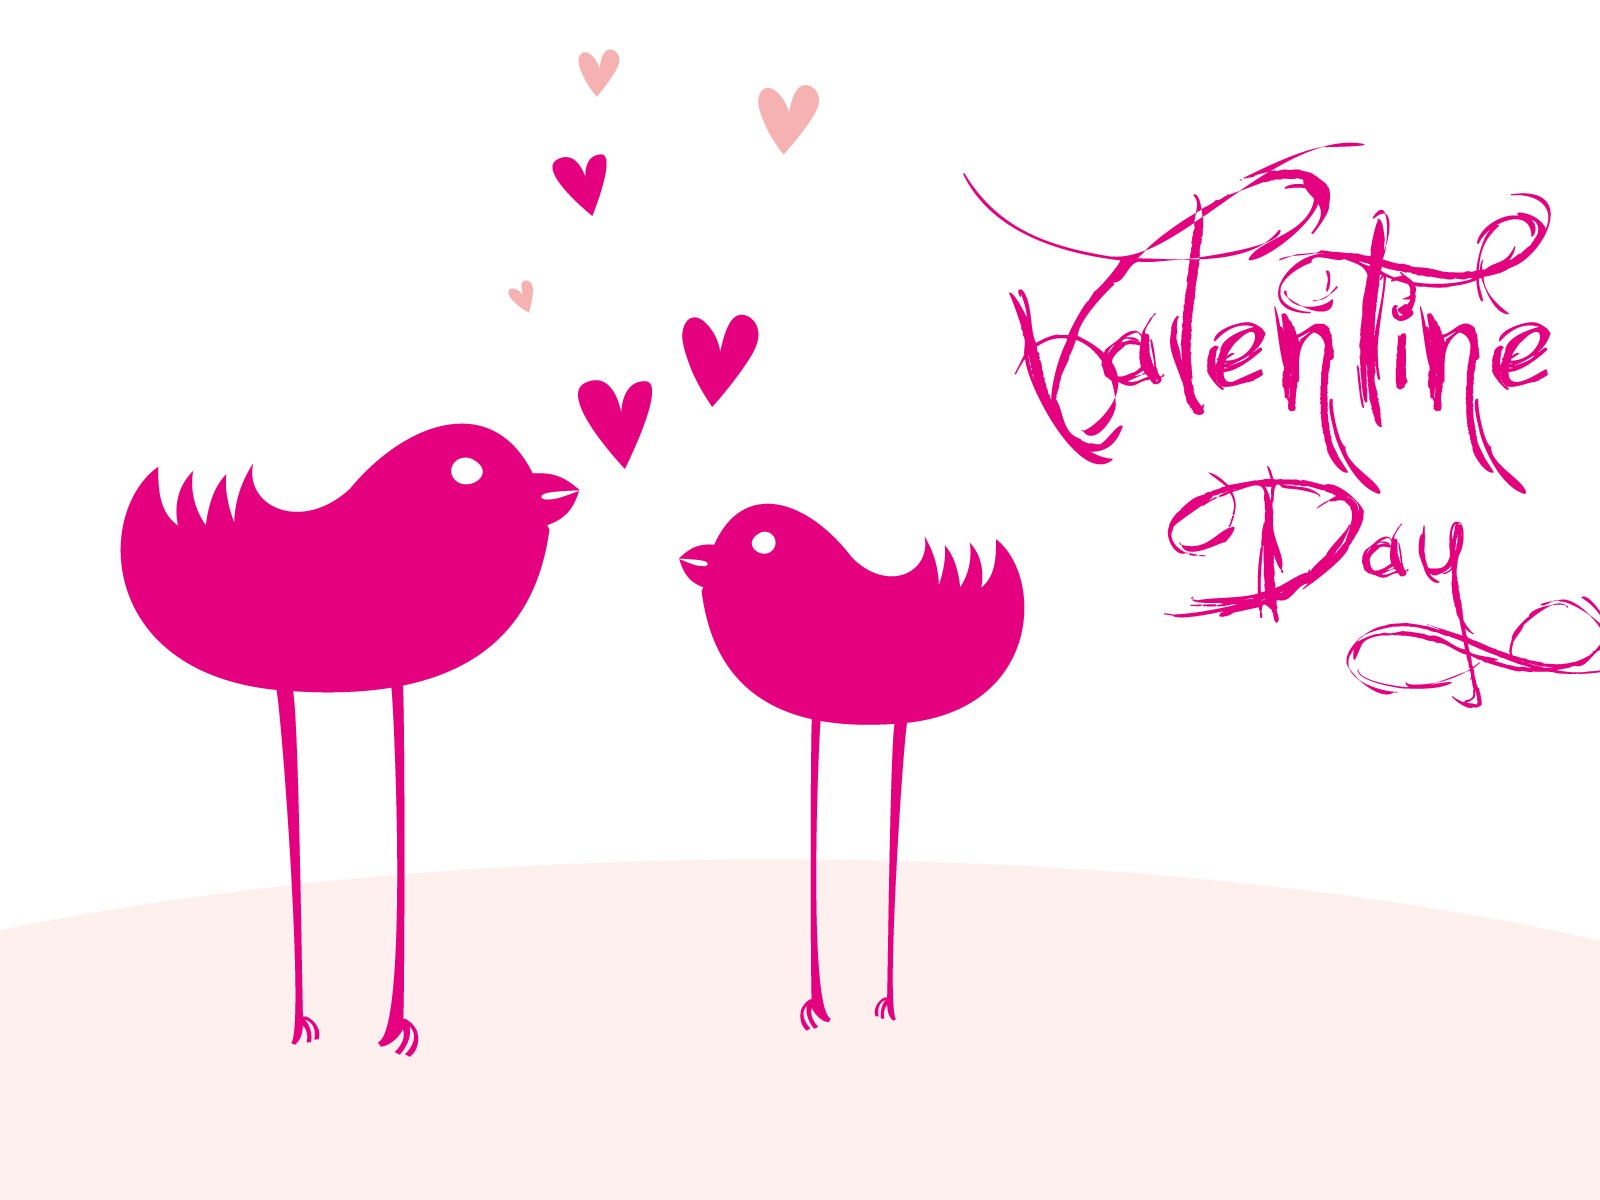 Valentine's Day Love Theme Wallpapers #37 - 1600x1200